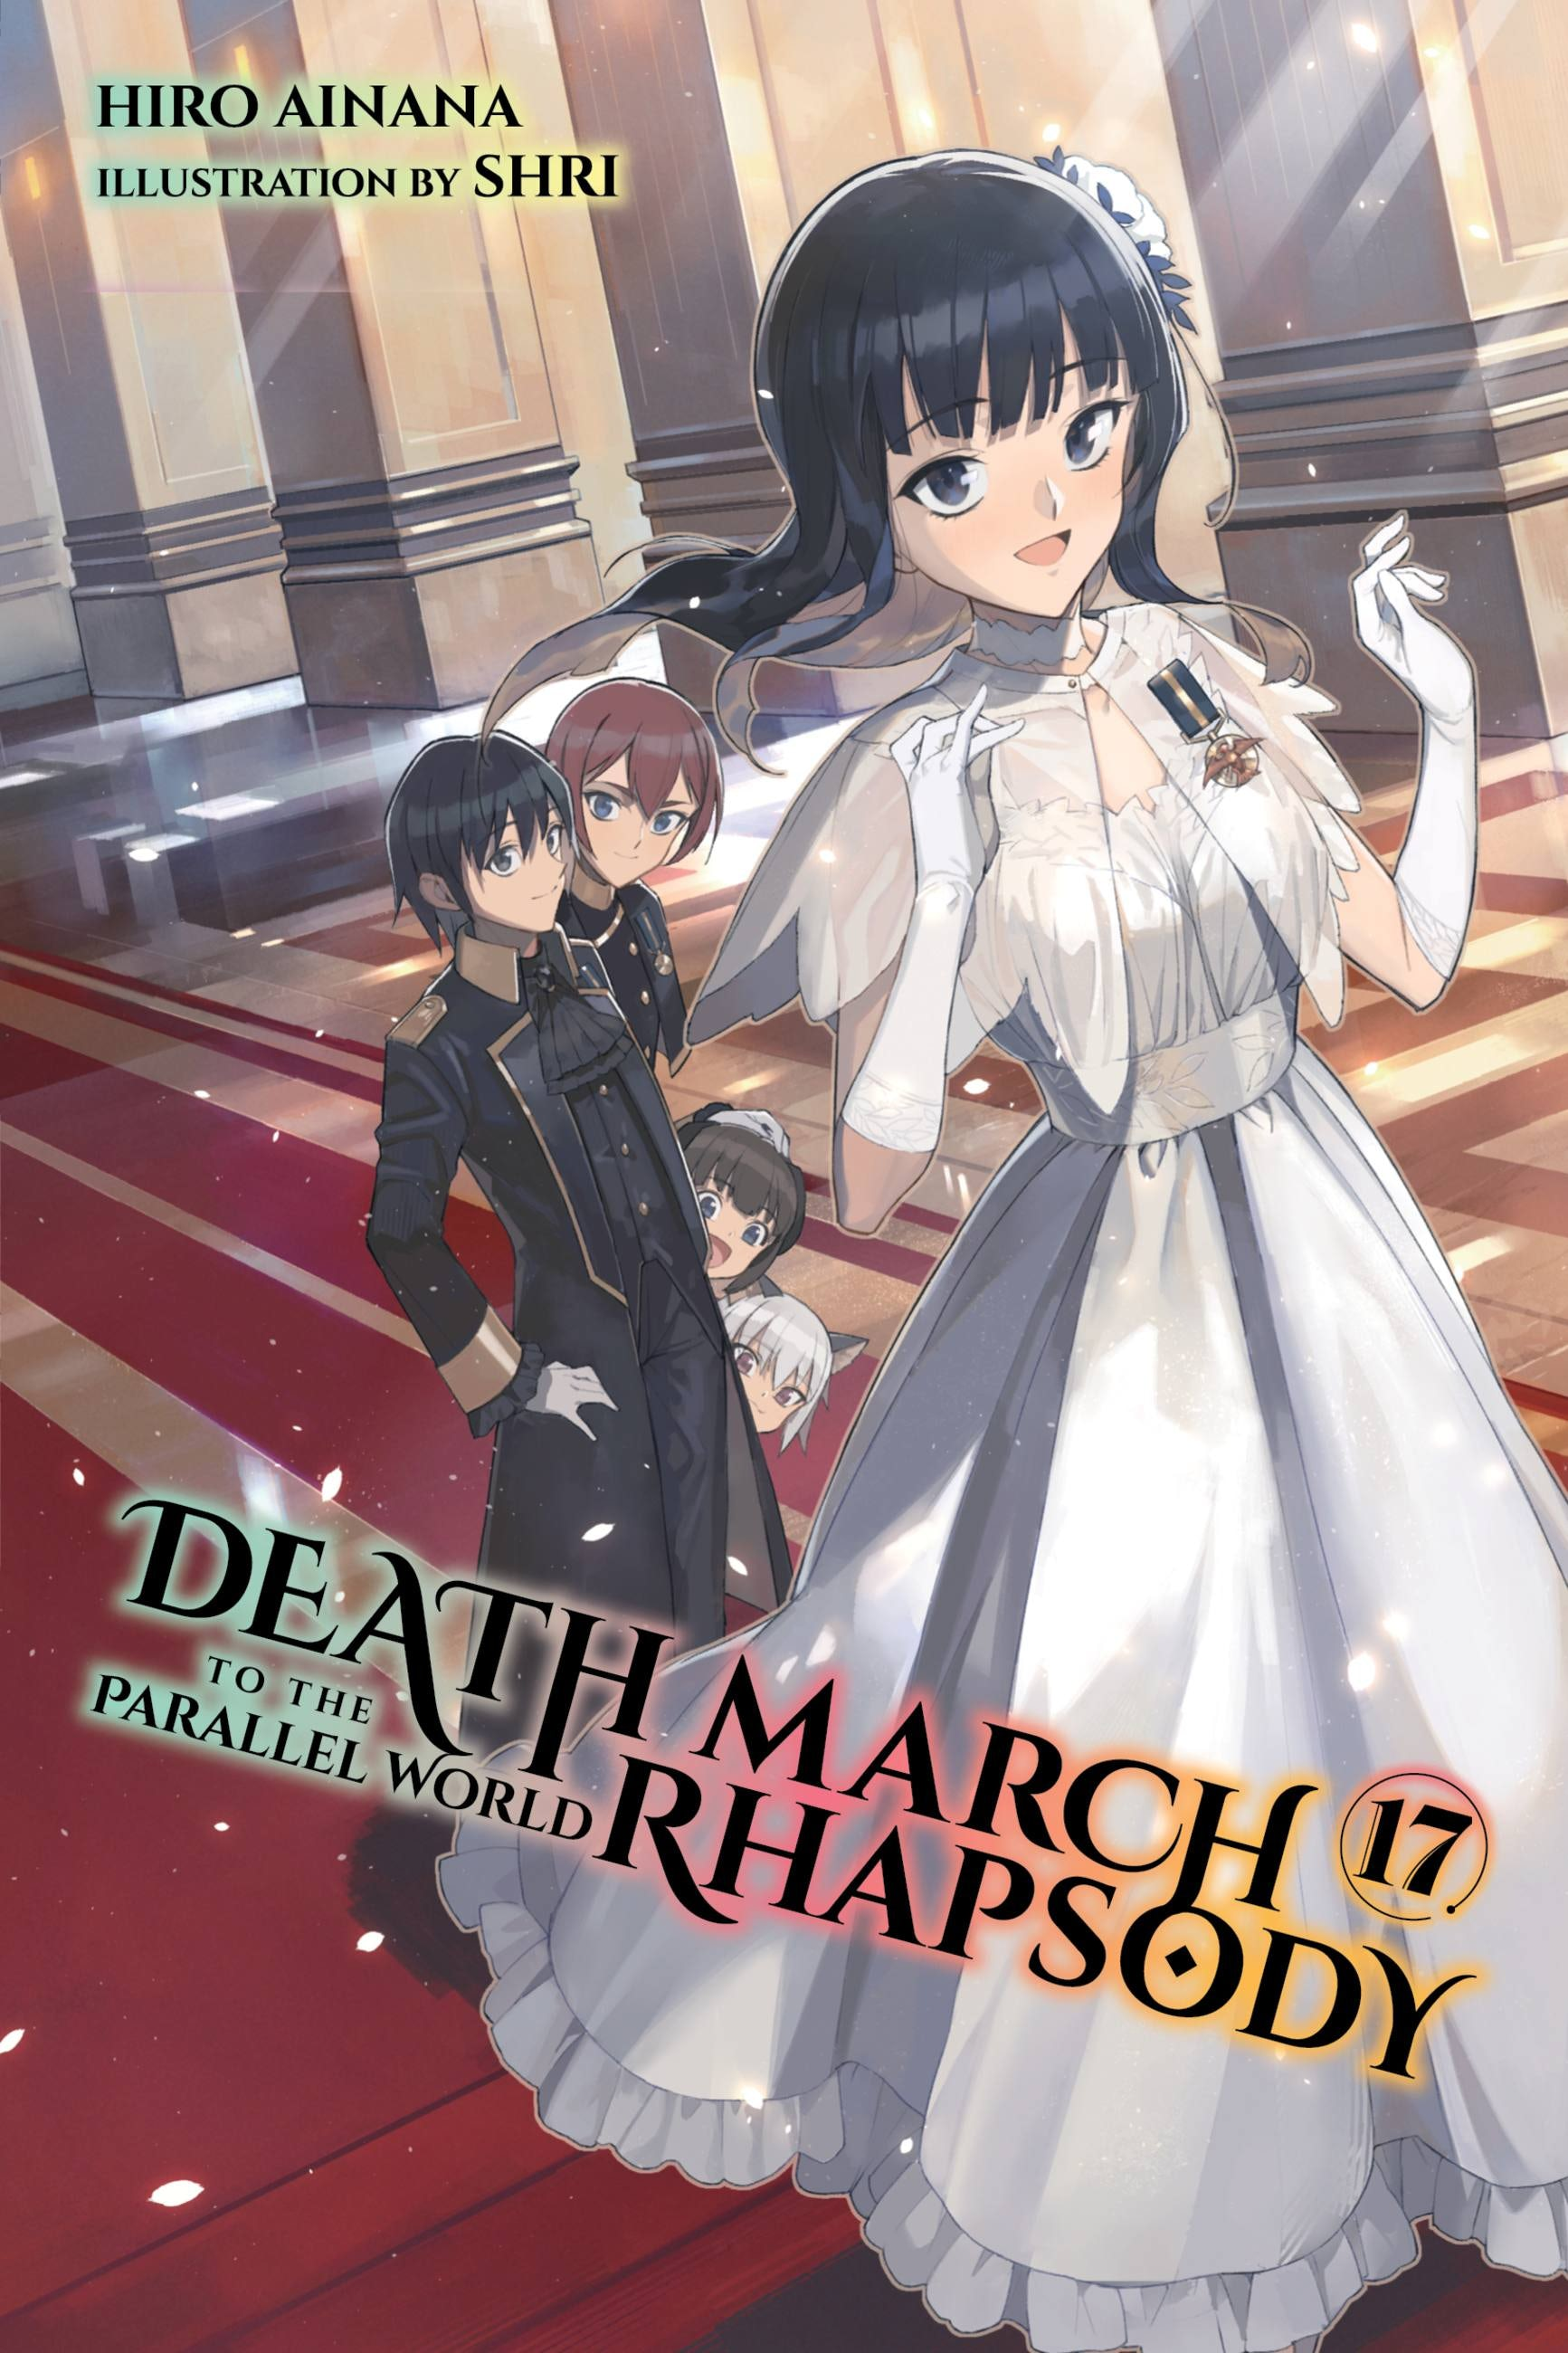 Death March to the Parallel World Rhapsody A Trip to the Underworld That  Started With a Death March - Watch on Crunchyroll